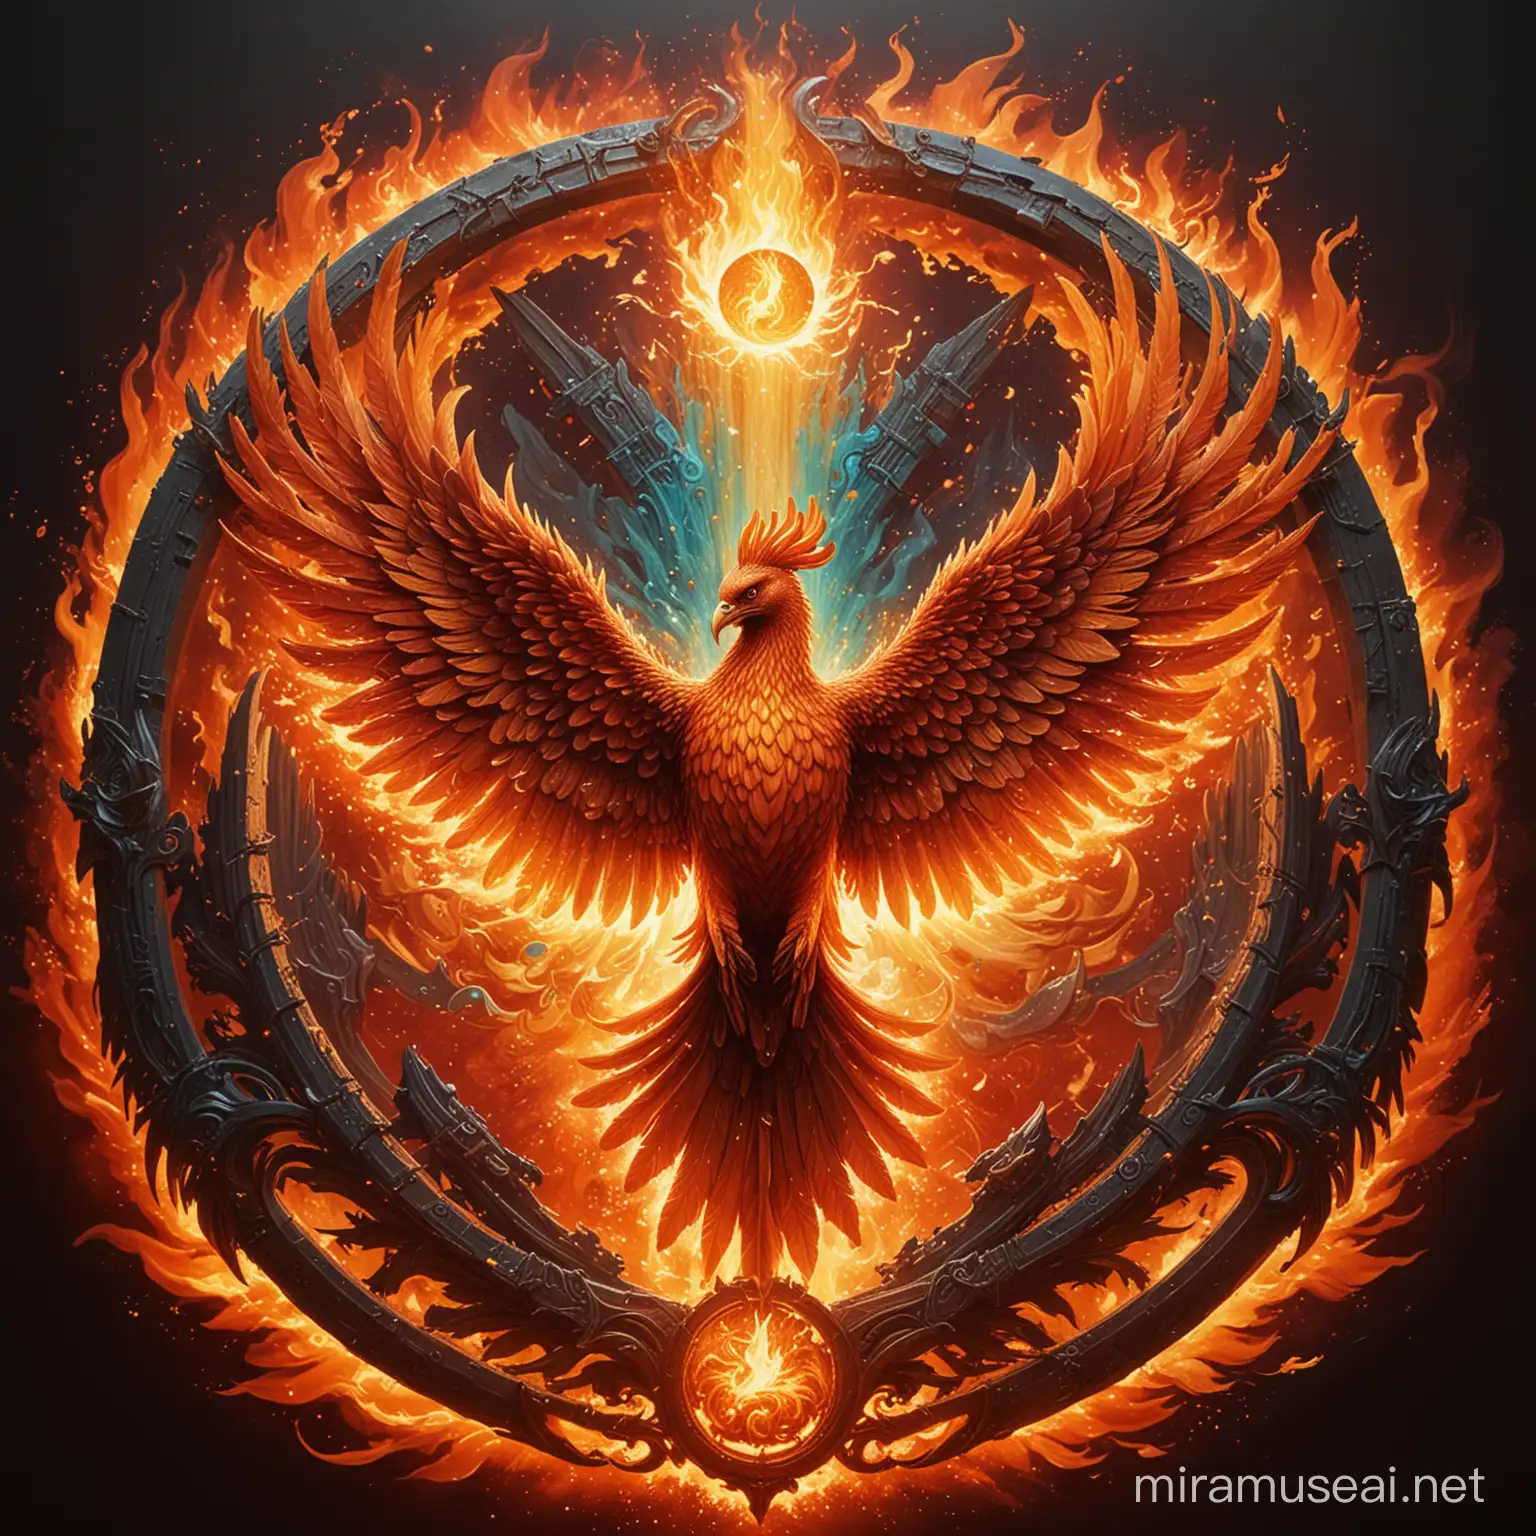 The Inferno Phoenix is a dynamic representation of their fiery and mythical theme. The symbol features a stylized phoenix in mid-flight, with wings outstretched and flames trailing behind. The phoenix is rendered in vibrant shades of red, orange, and gold, creating a mesmerizing display of inferno-like hues.

At the heart of the phoenix, an enigmatic eye glows with an intense fiery light, symbolizing the watchful and formidable presence of the Inferno Phoenix Posse. The feathers of the phoenix morph into flames, evoking the gang's association with fire and destruction.

The entire emblem is encircled by intricate flame patterns, adding an extra layer of intensity and energy. The overall design captures the essence of the gang's mythical affinity with the phoenix, a symbol of rebirth and eternal flame.

 fiery reds, vibrant oranges, golden yellows, turquoise blue